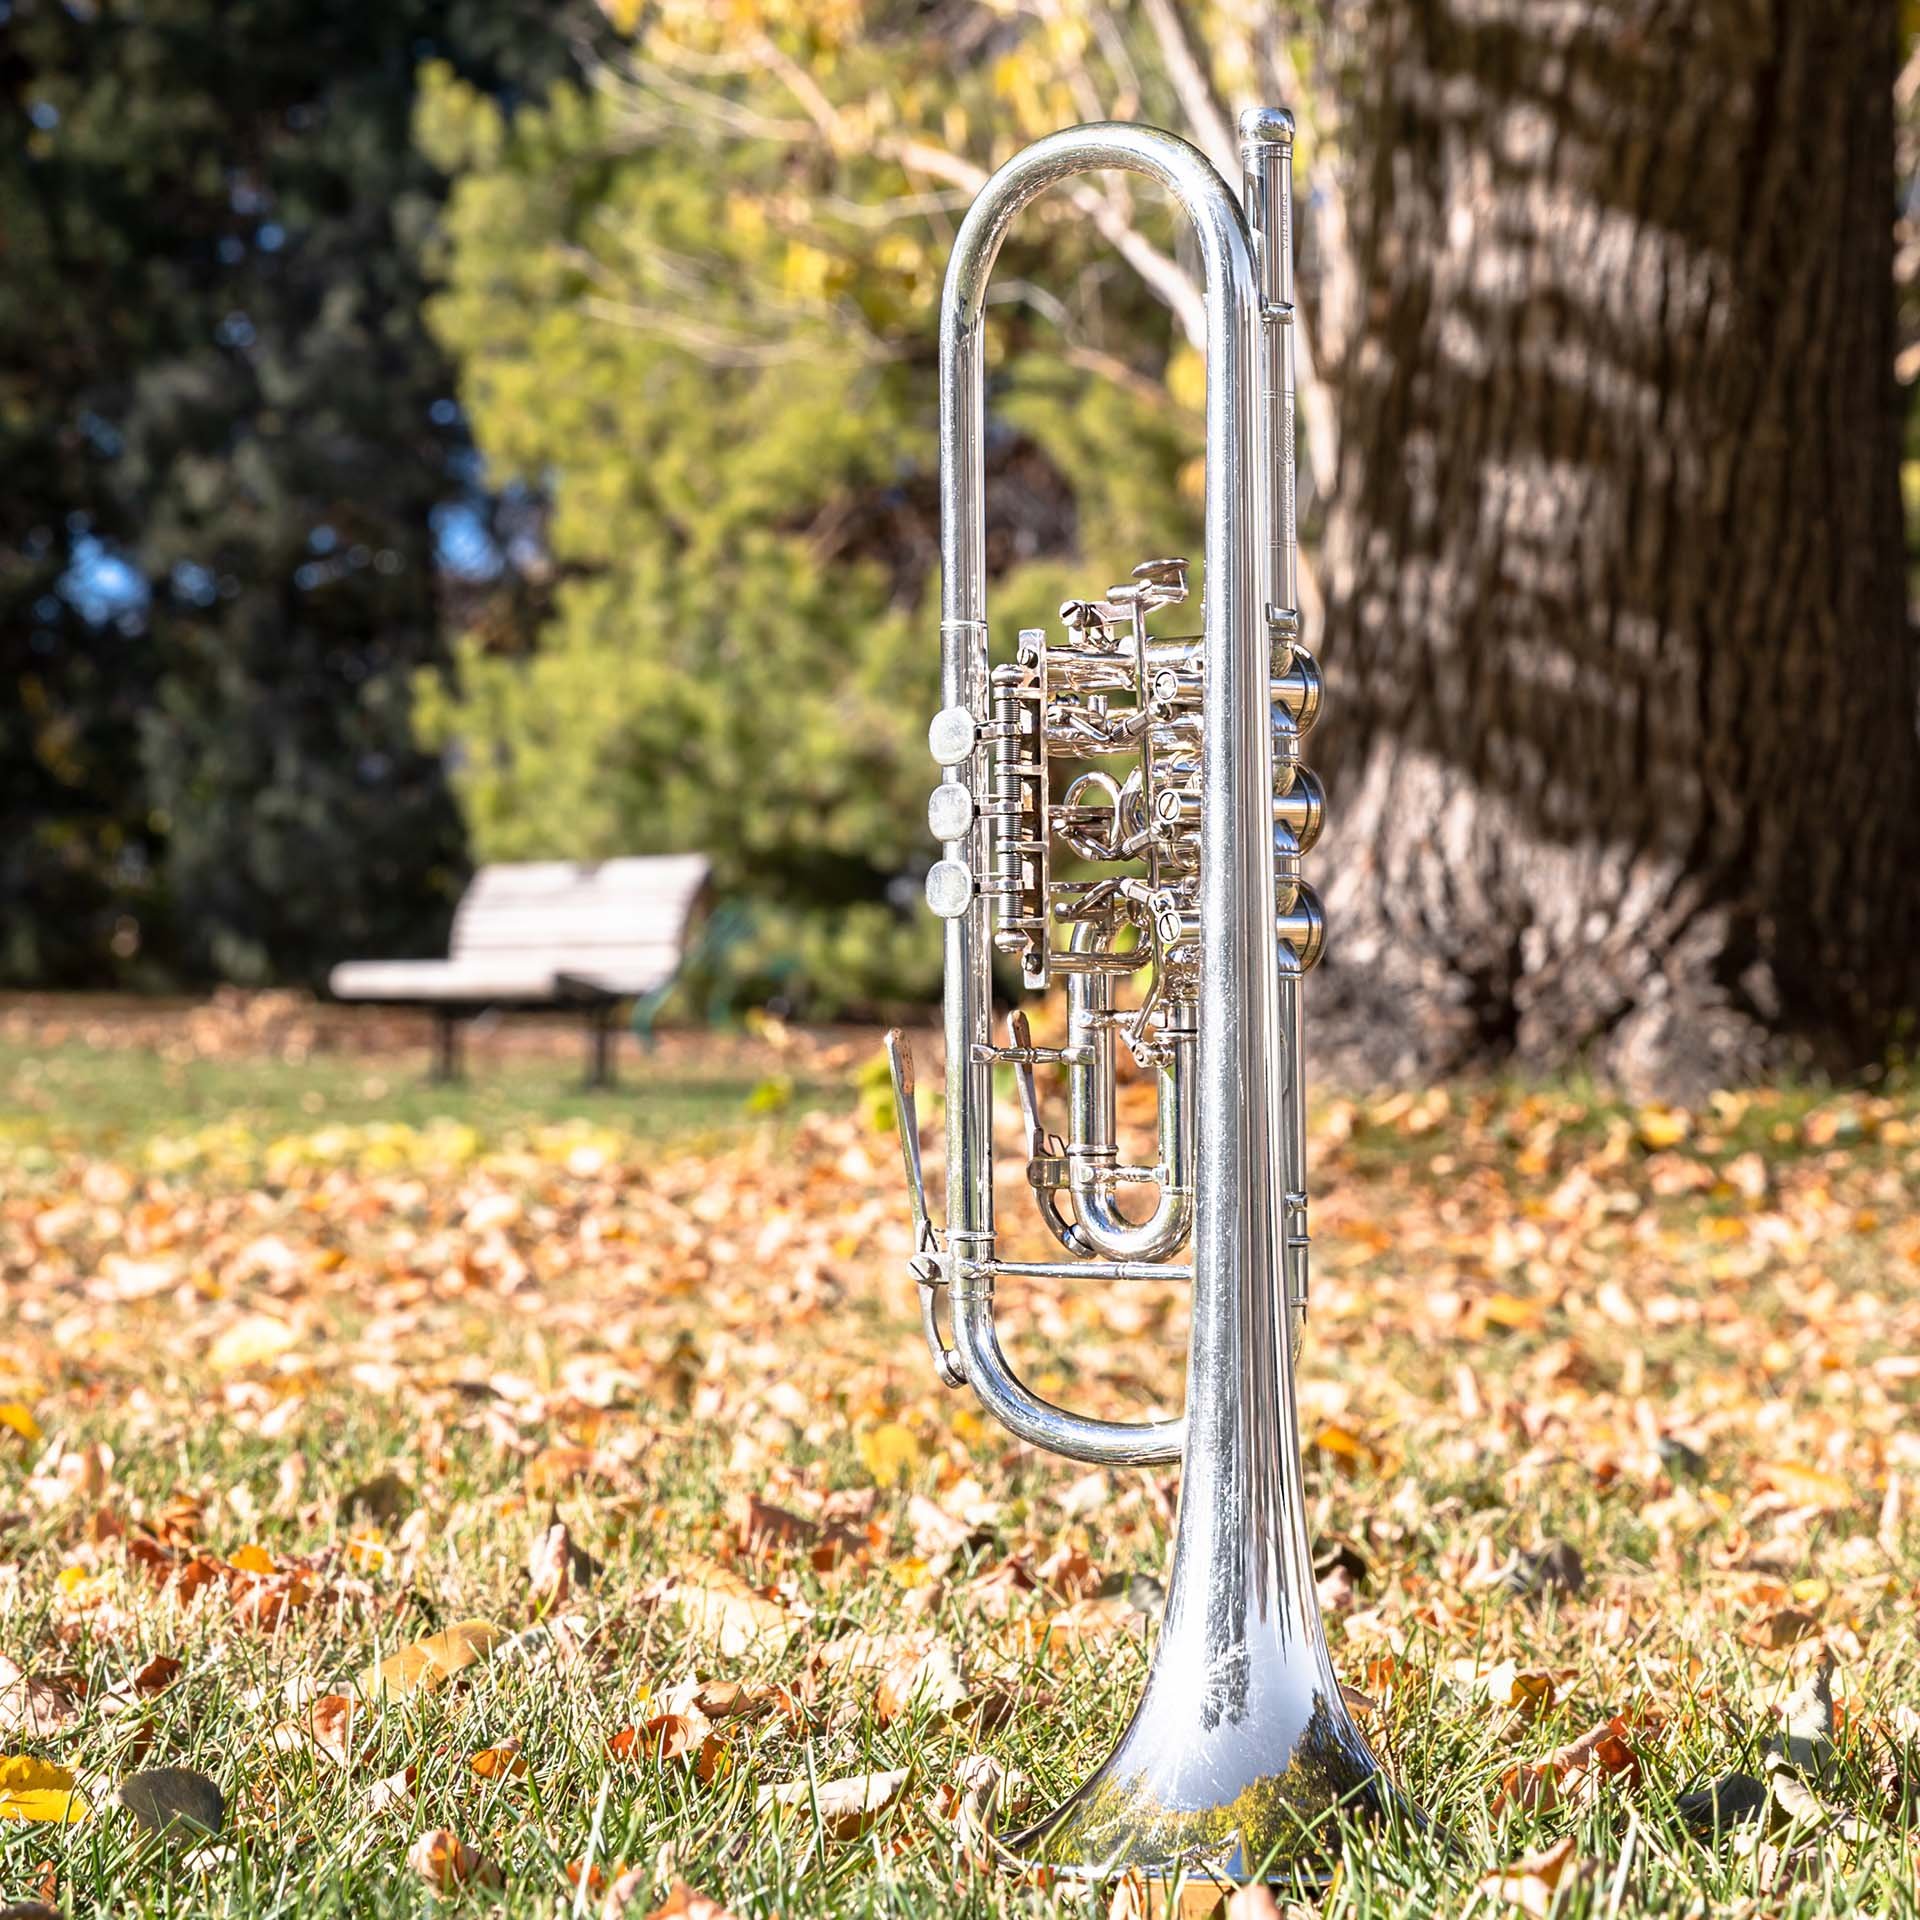 rotary trumpets